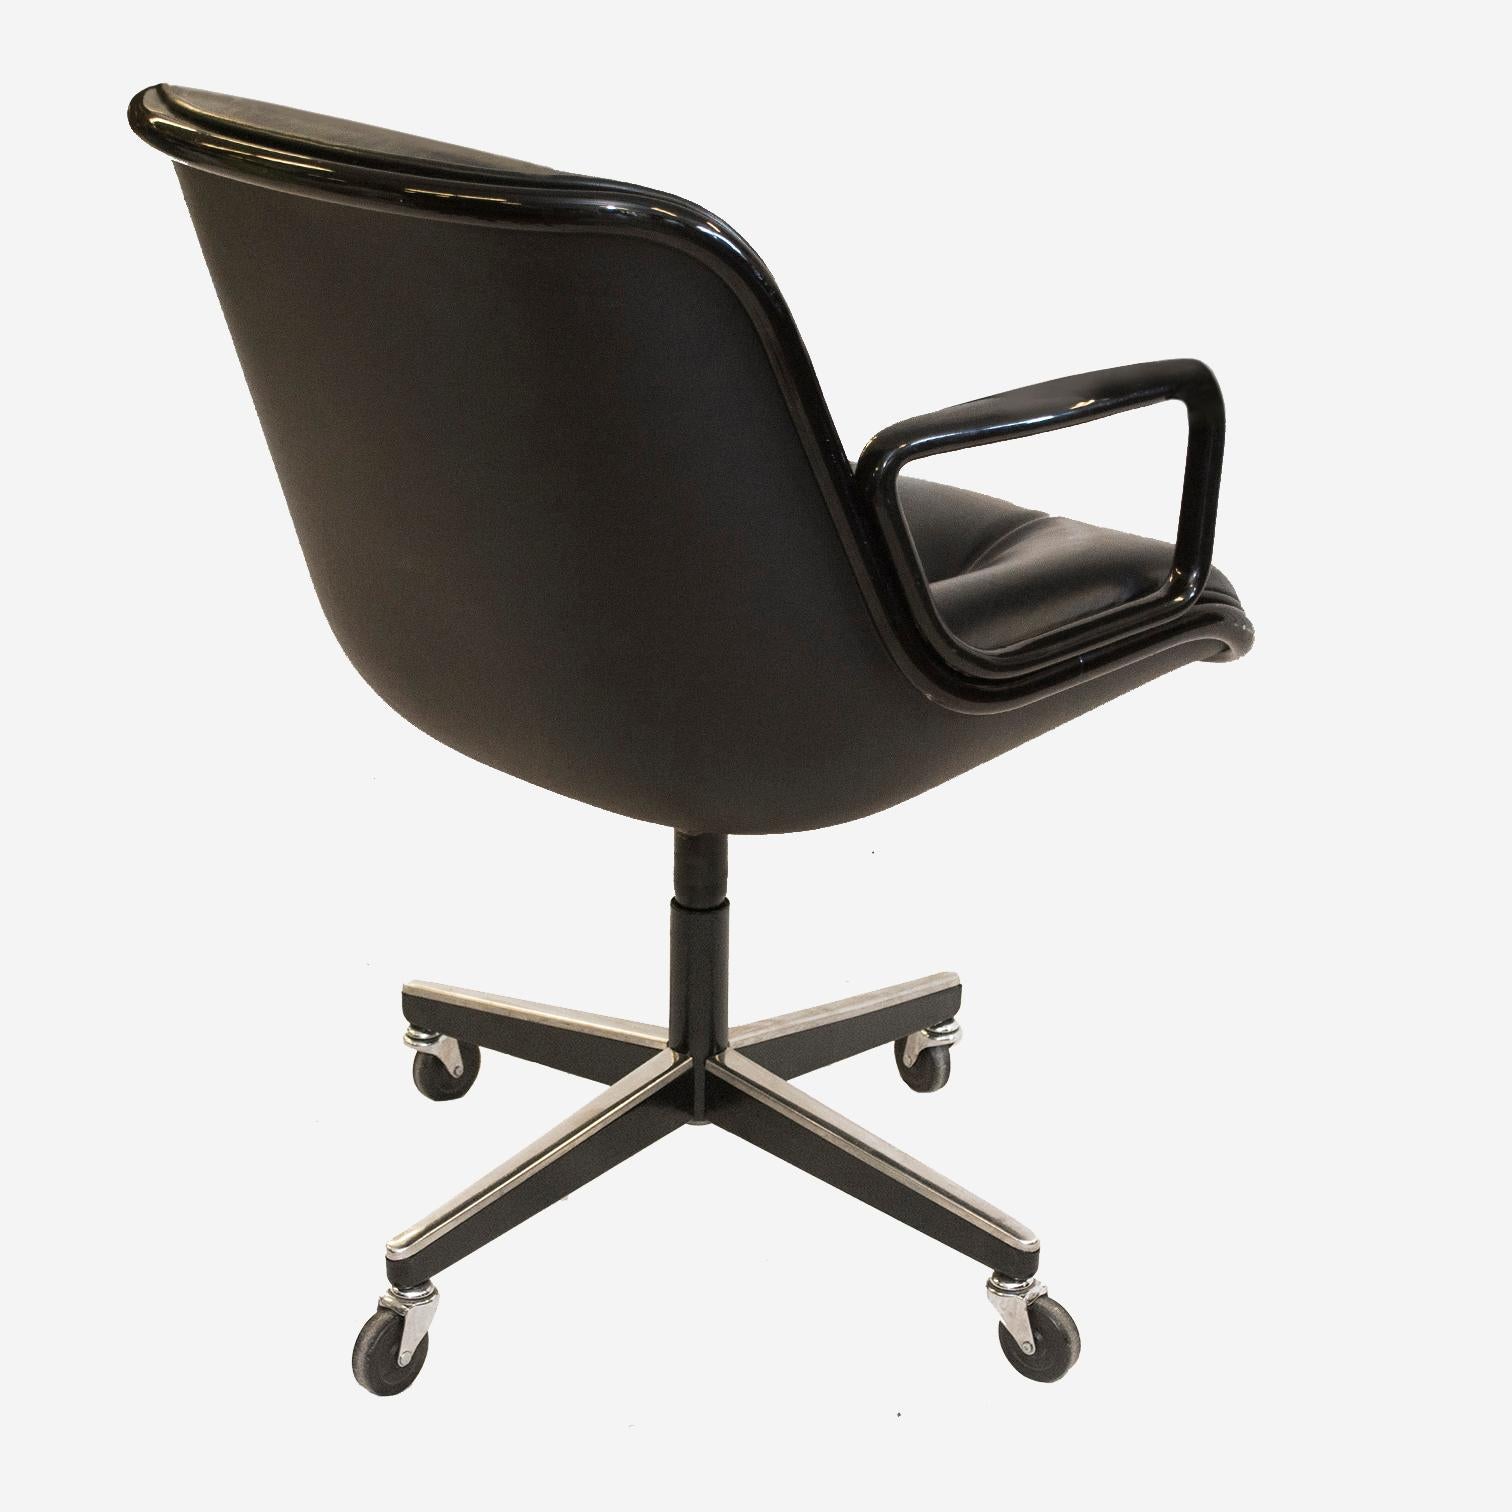 North American Knoll Pollock Executive Chair in Original Black Leather, Matte Black Frame For Sale